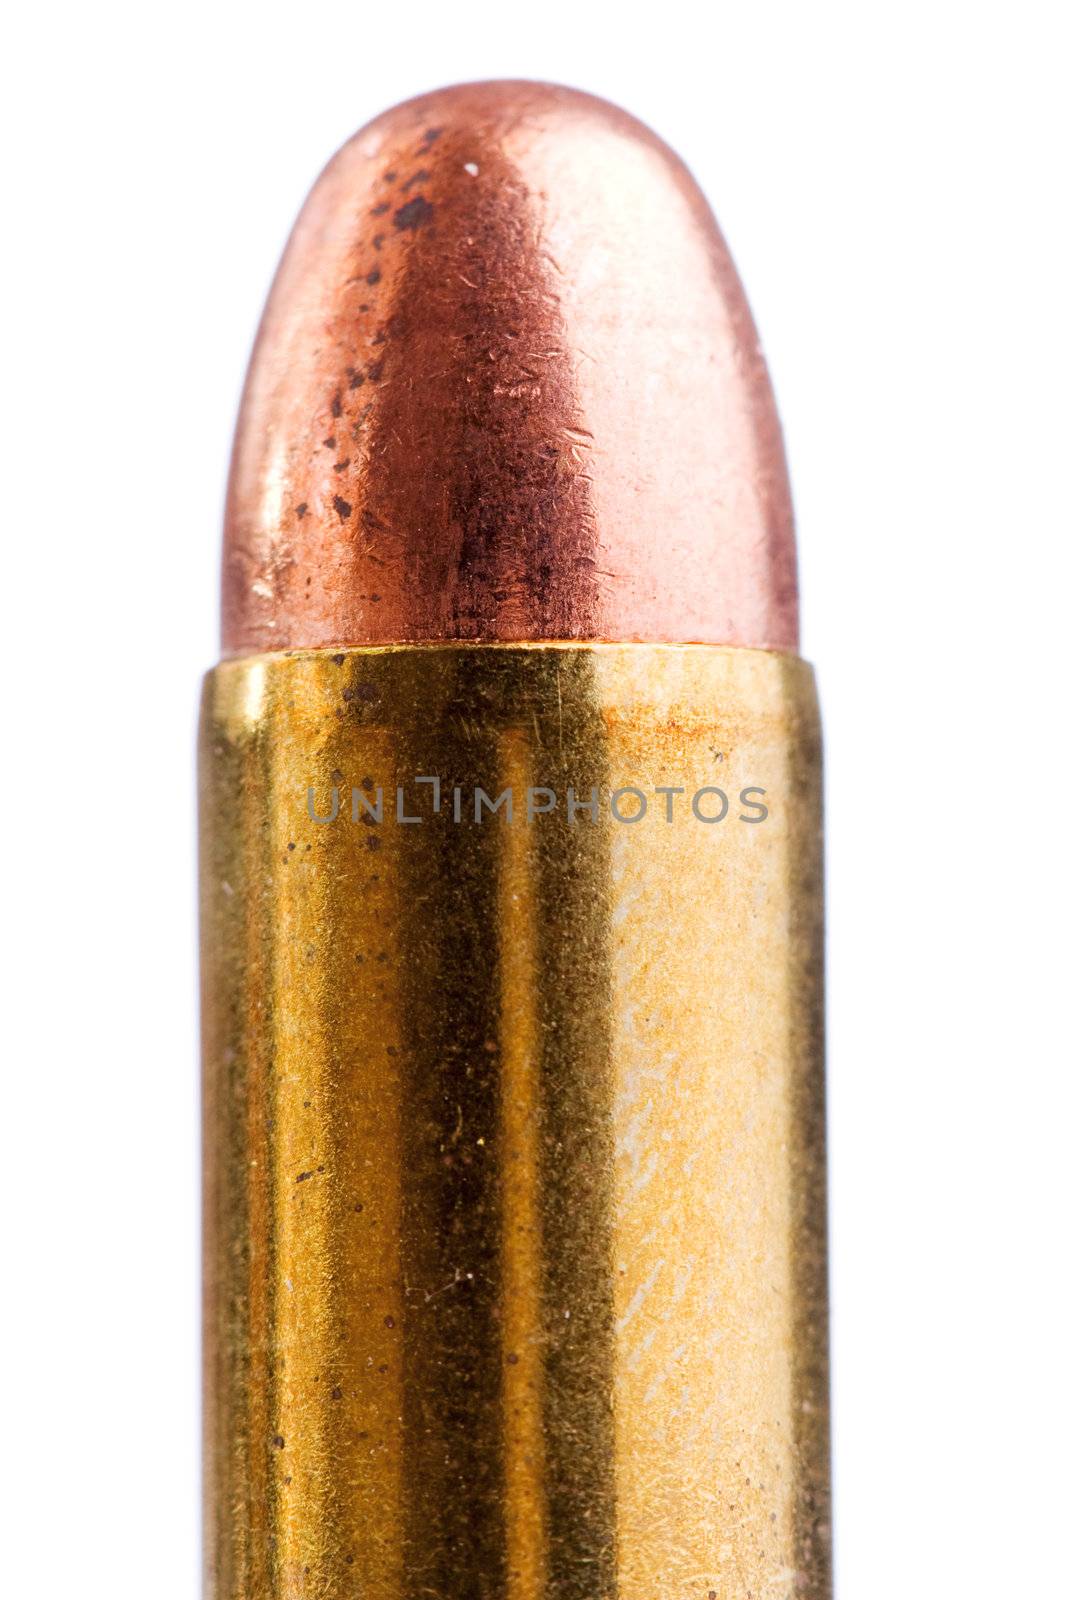 close up of a bullet, isolated on white